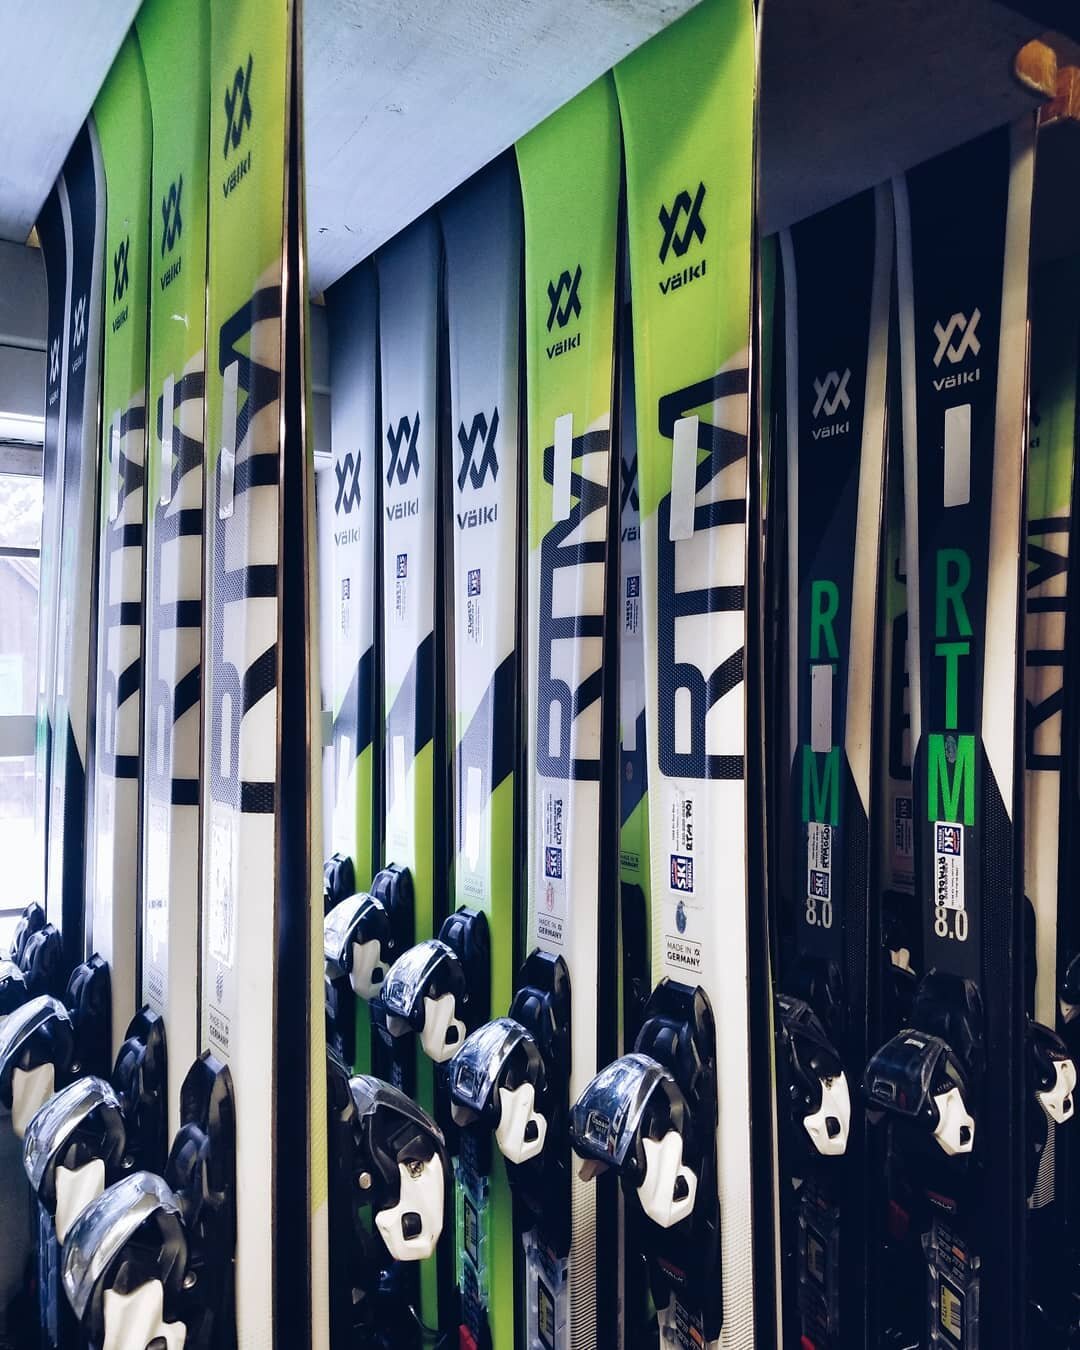 We keep our fleet fresh by constantly replacing our skis with new ones. Come on in and try this years new sport-ski. ⛷